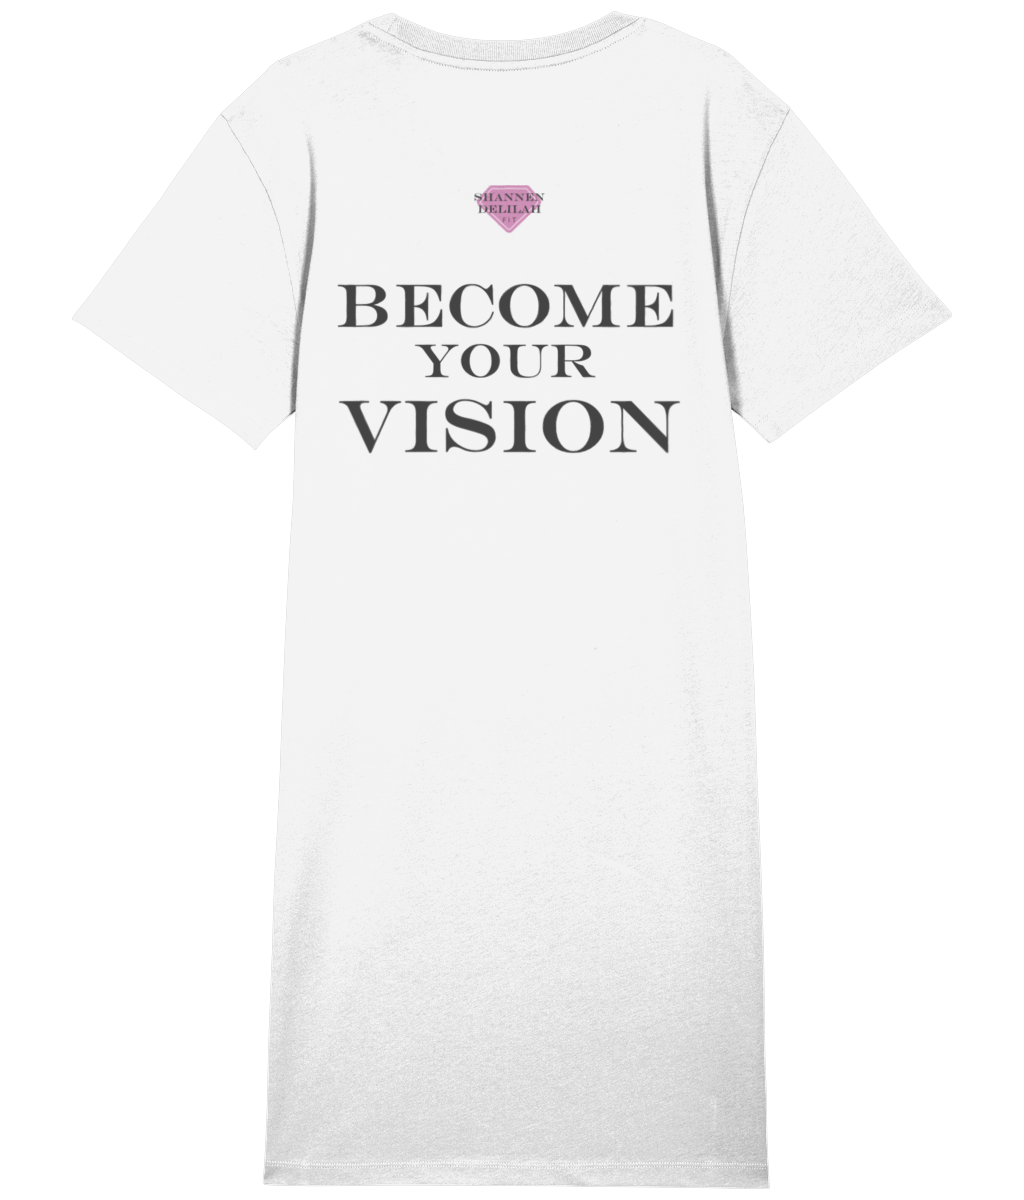 MY VISION IS ME T-SHIRT DRESS